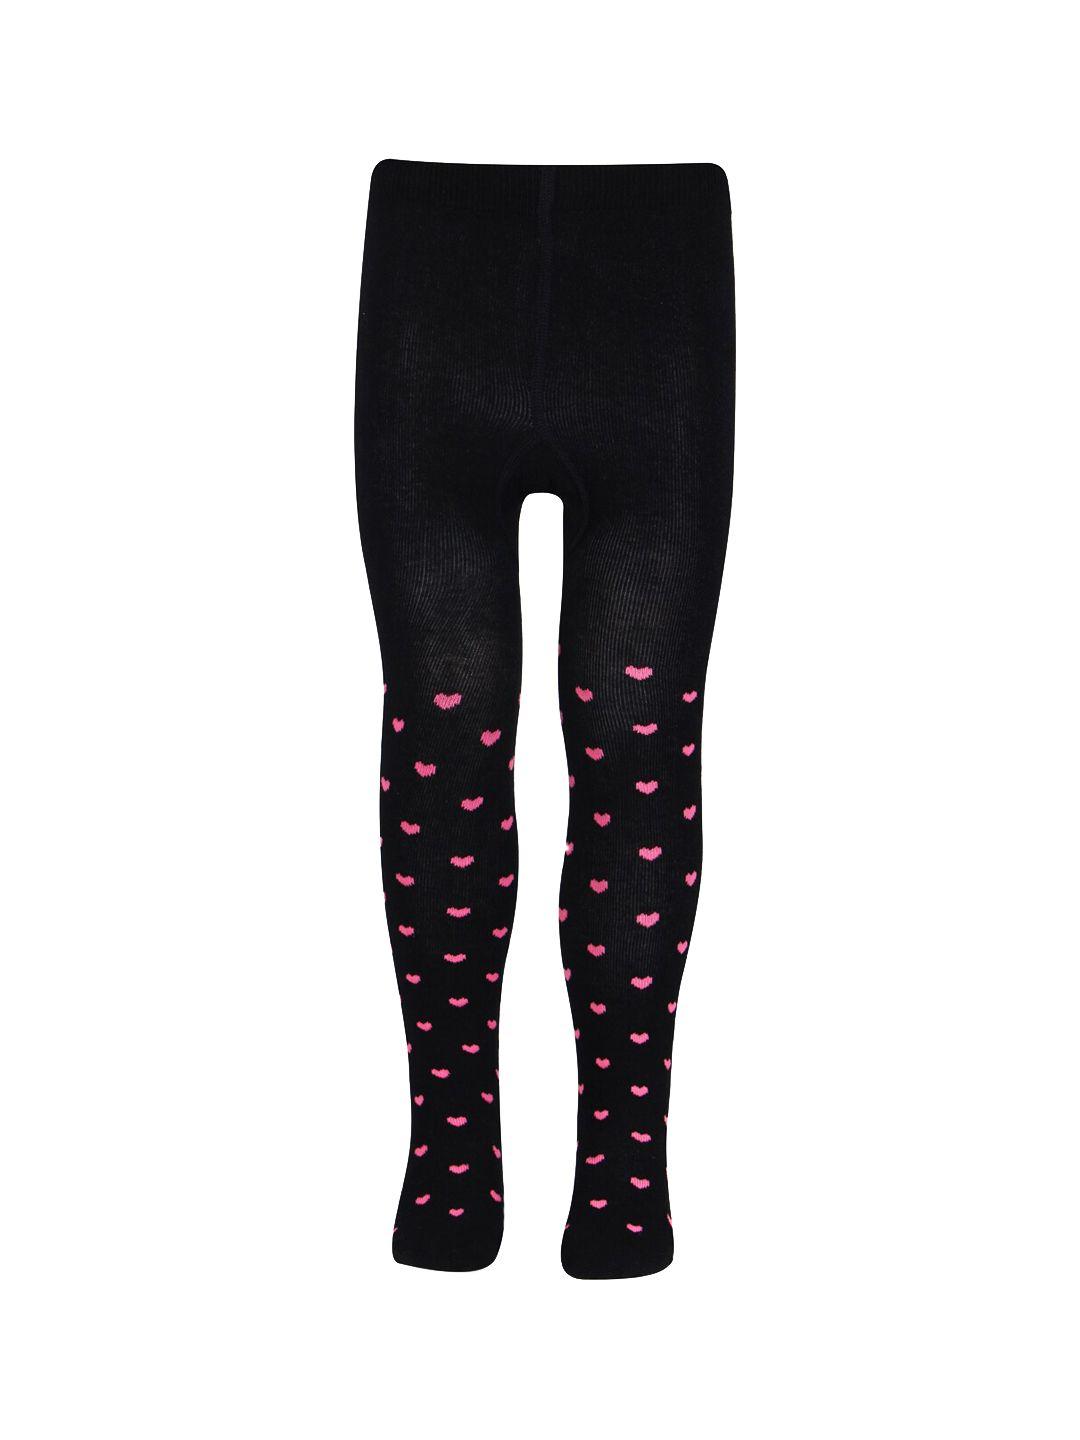 bonjour-kids-printed-cotton-tights-with-attached-stockings